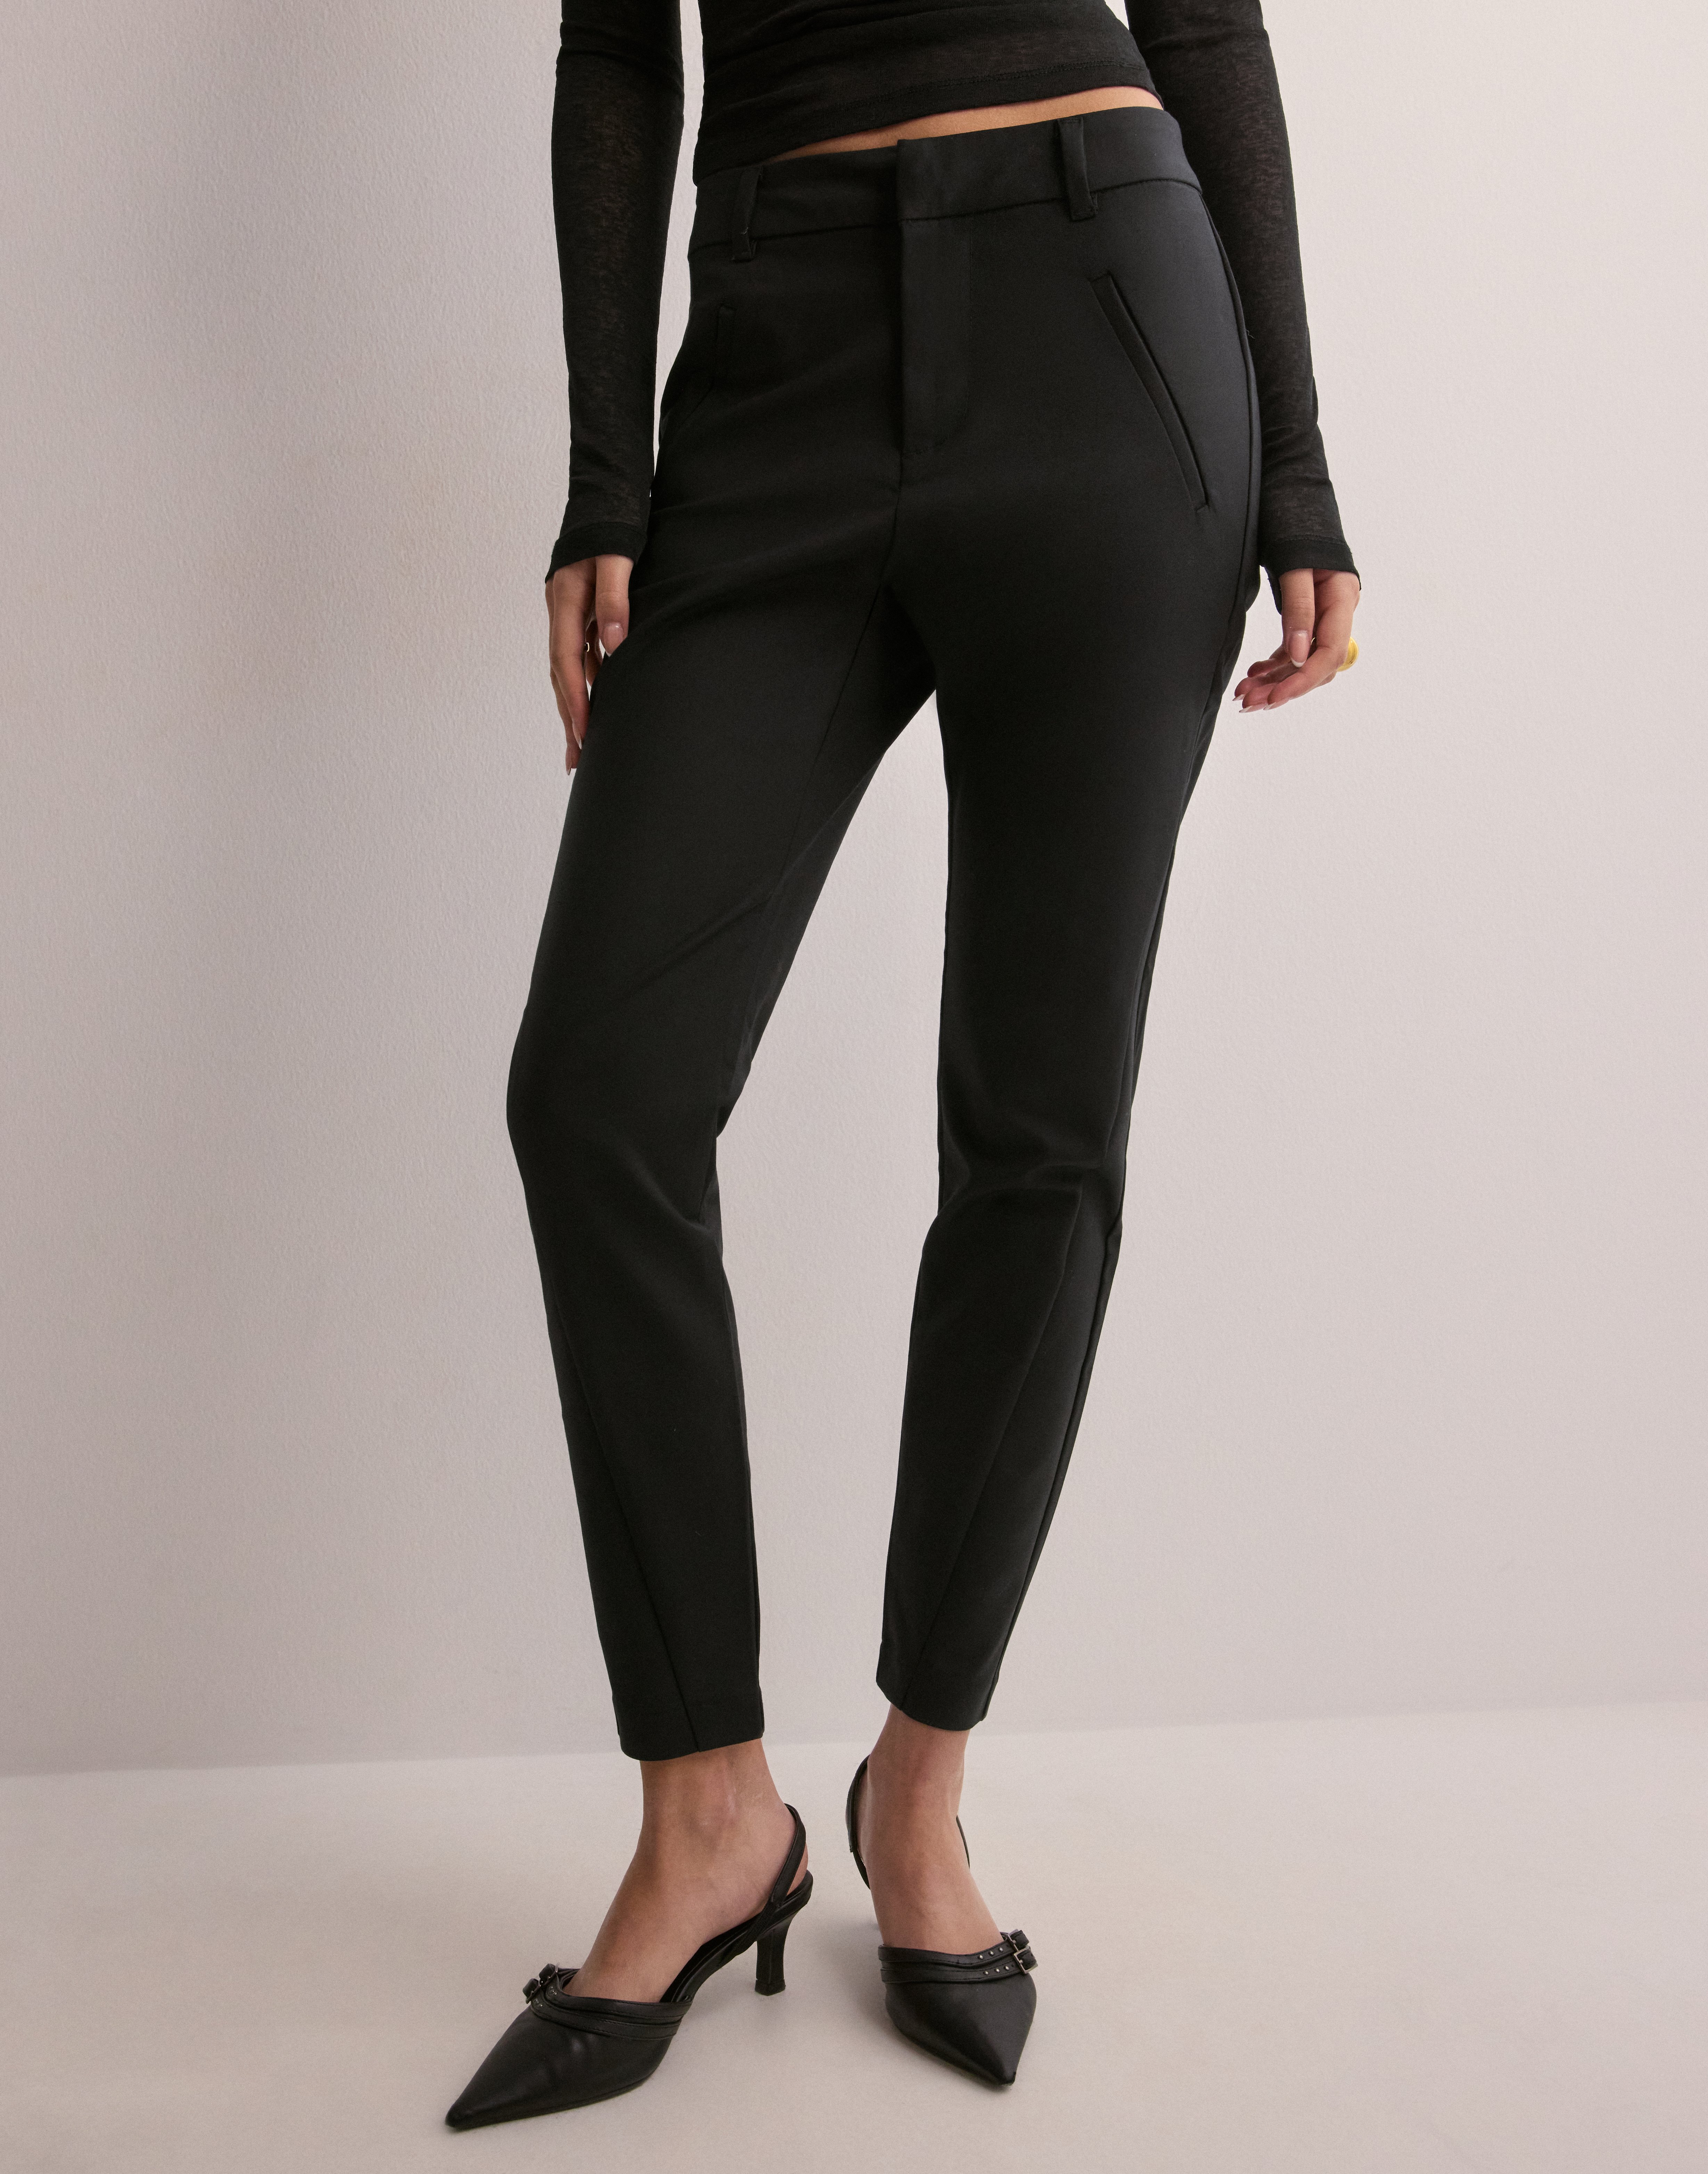 NW ANKLE PANTS - Black - Nelly.com